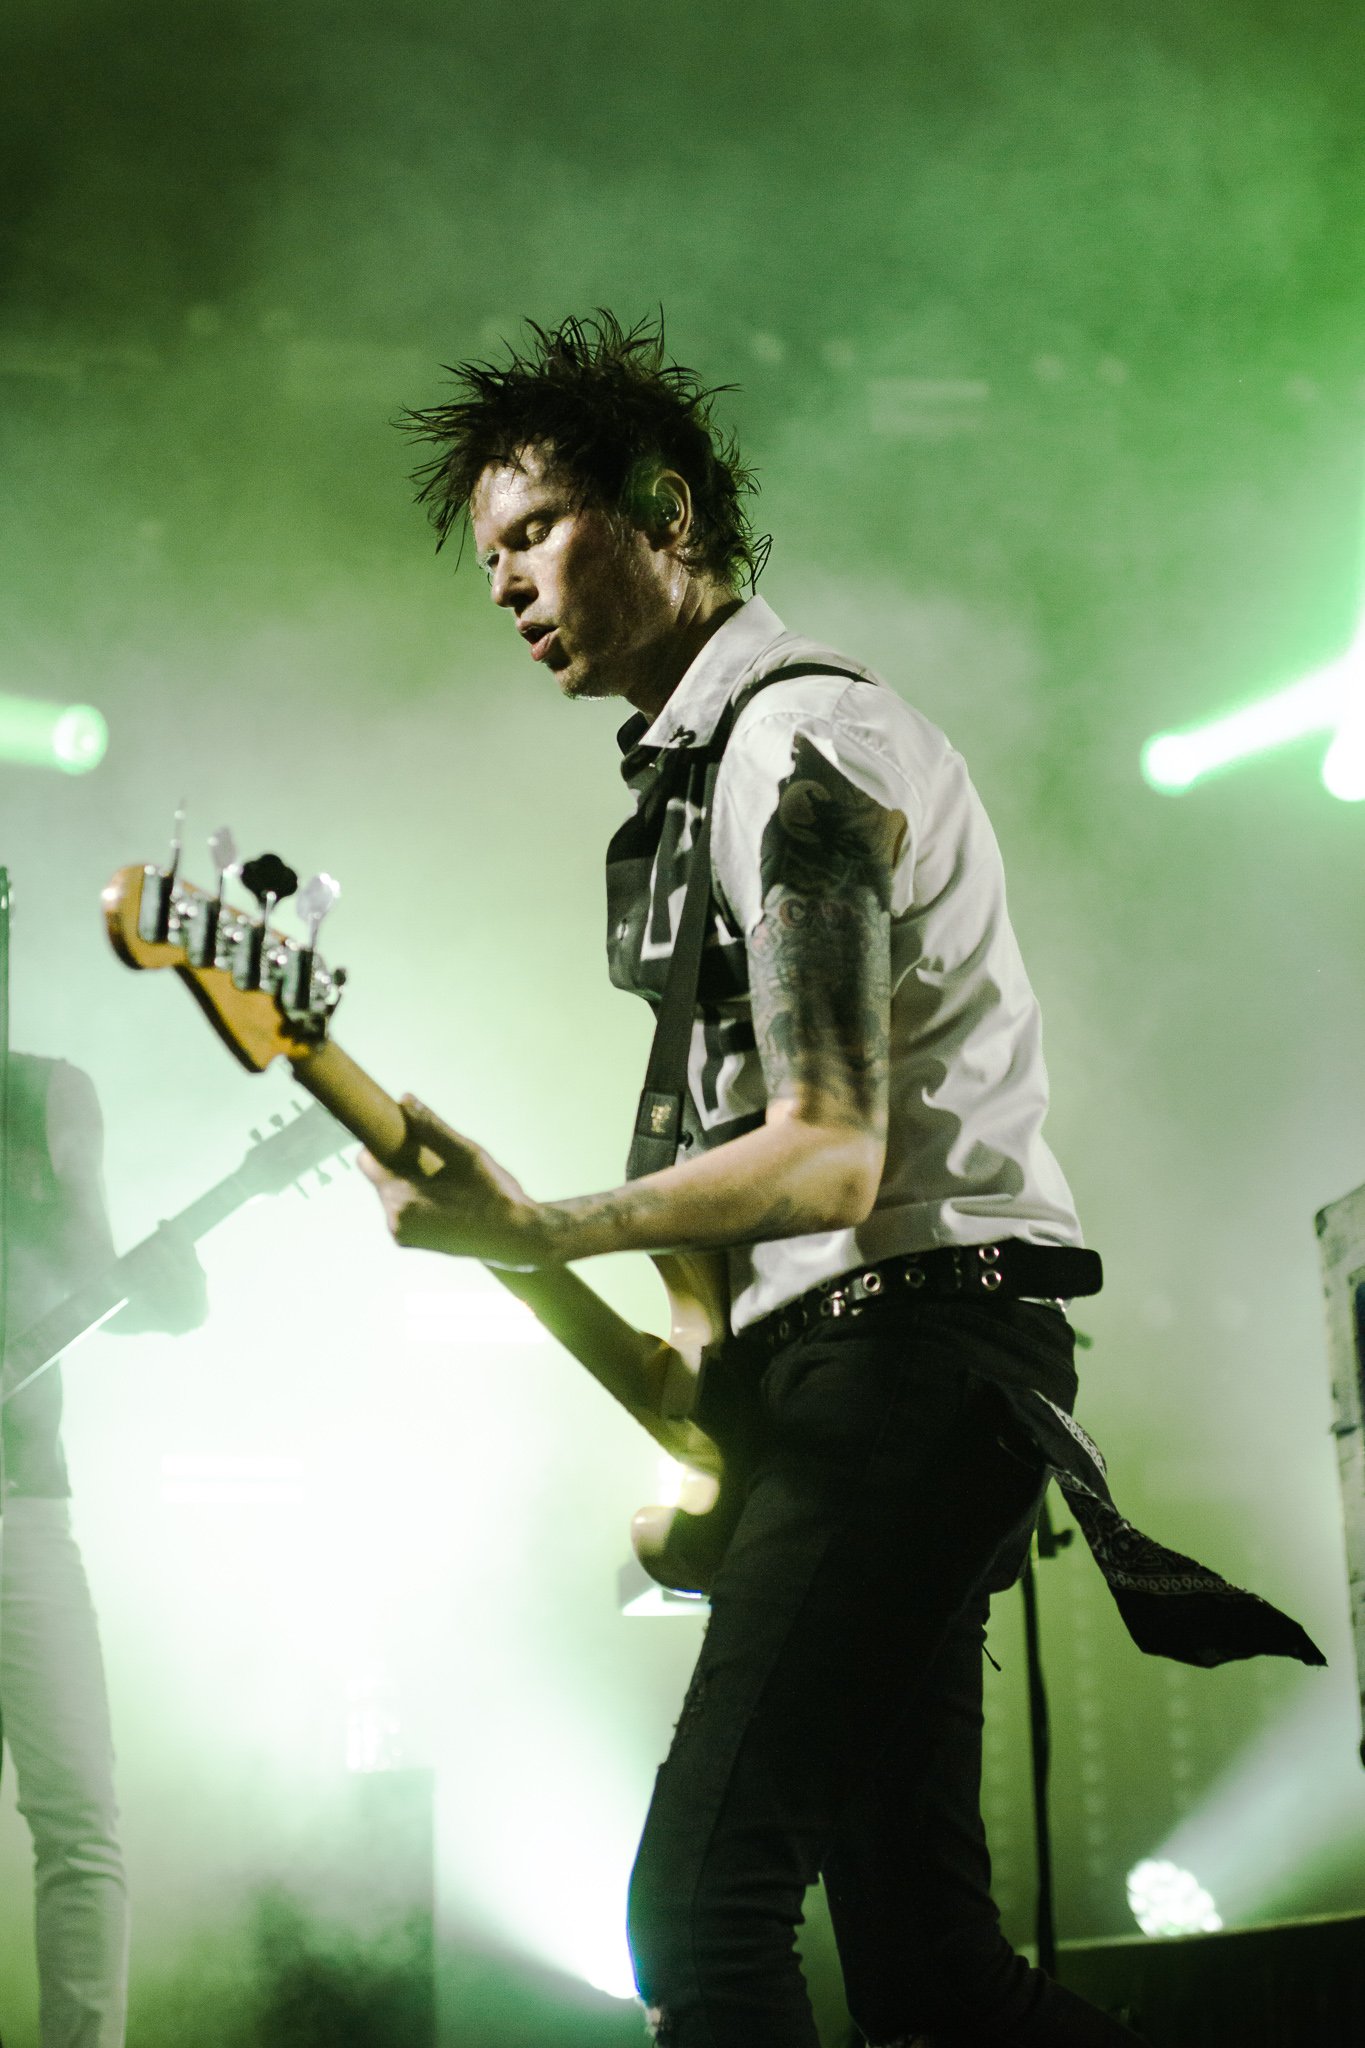  Bassist Jason McCaslin of Sum 41 plays his heart out to the excited crowd. 